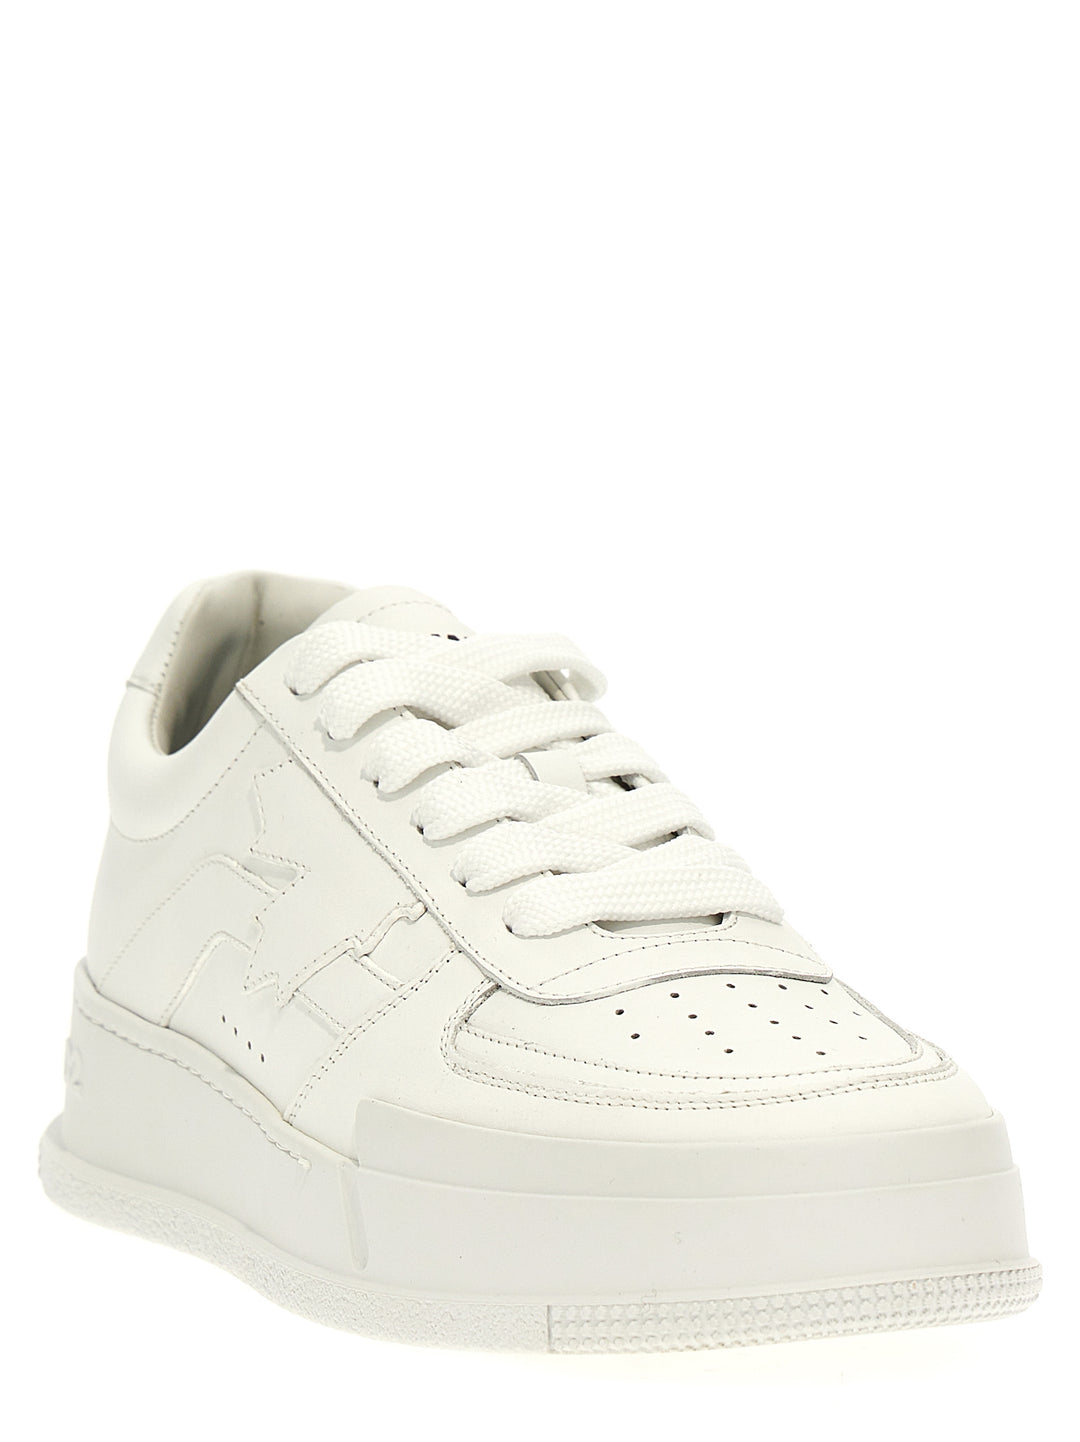 Canadian Sneakers Bianco